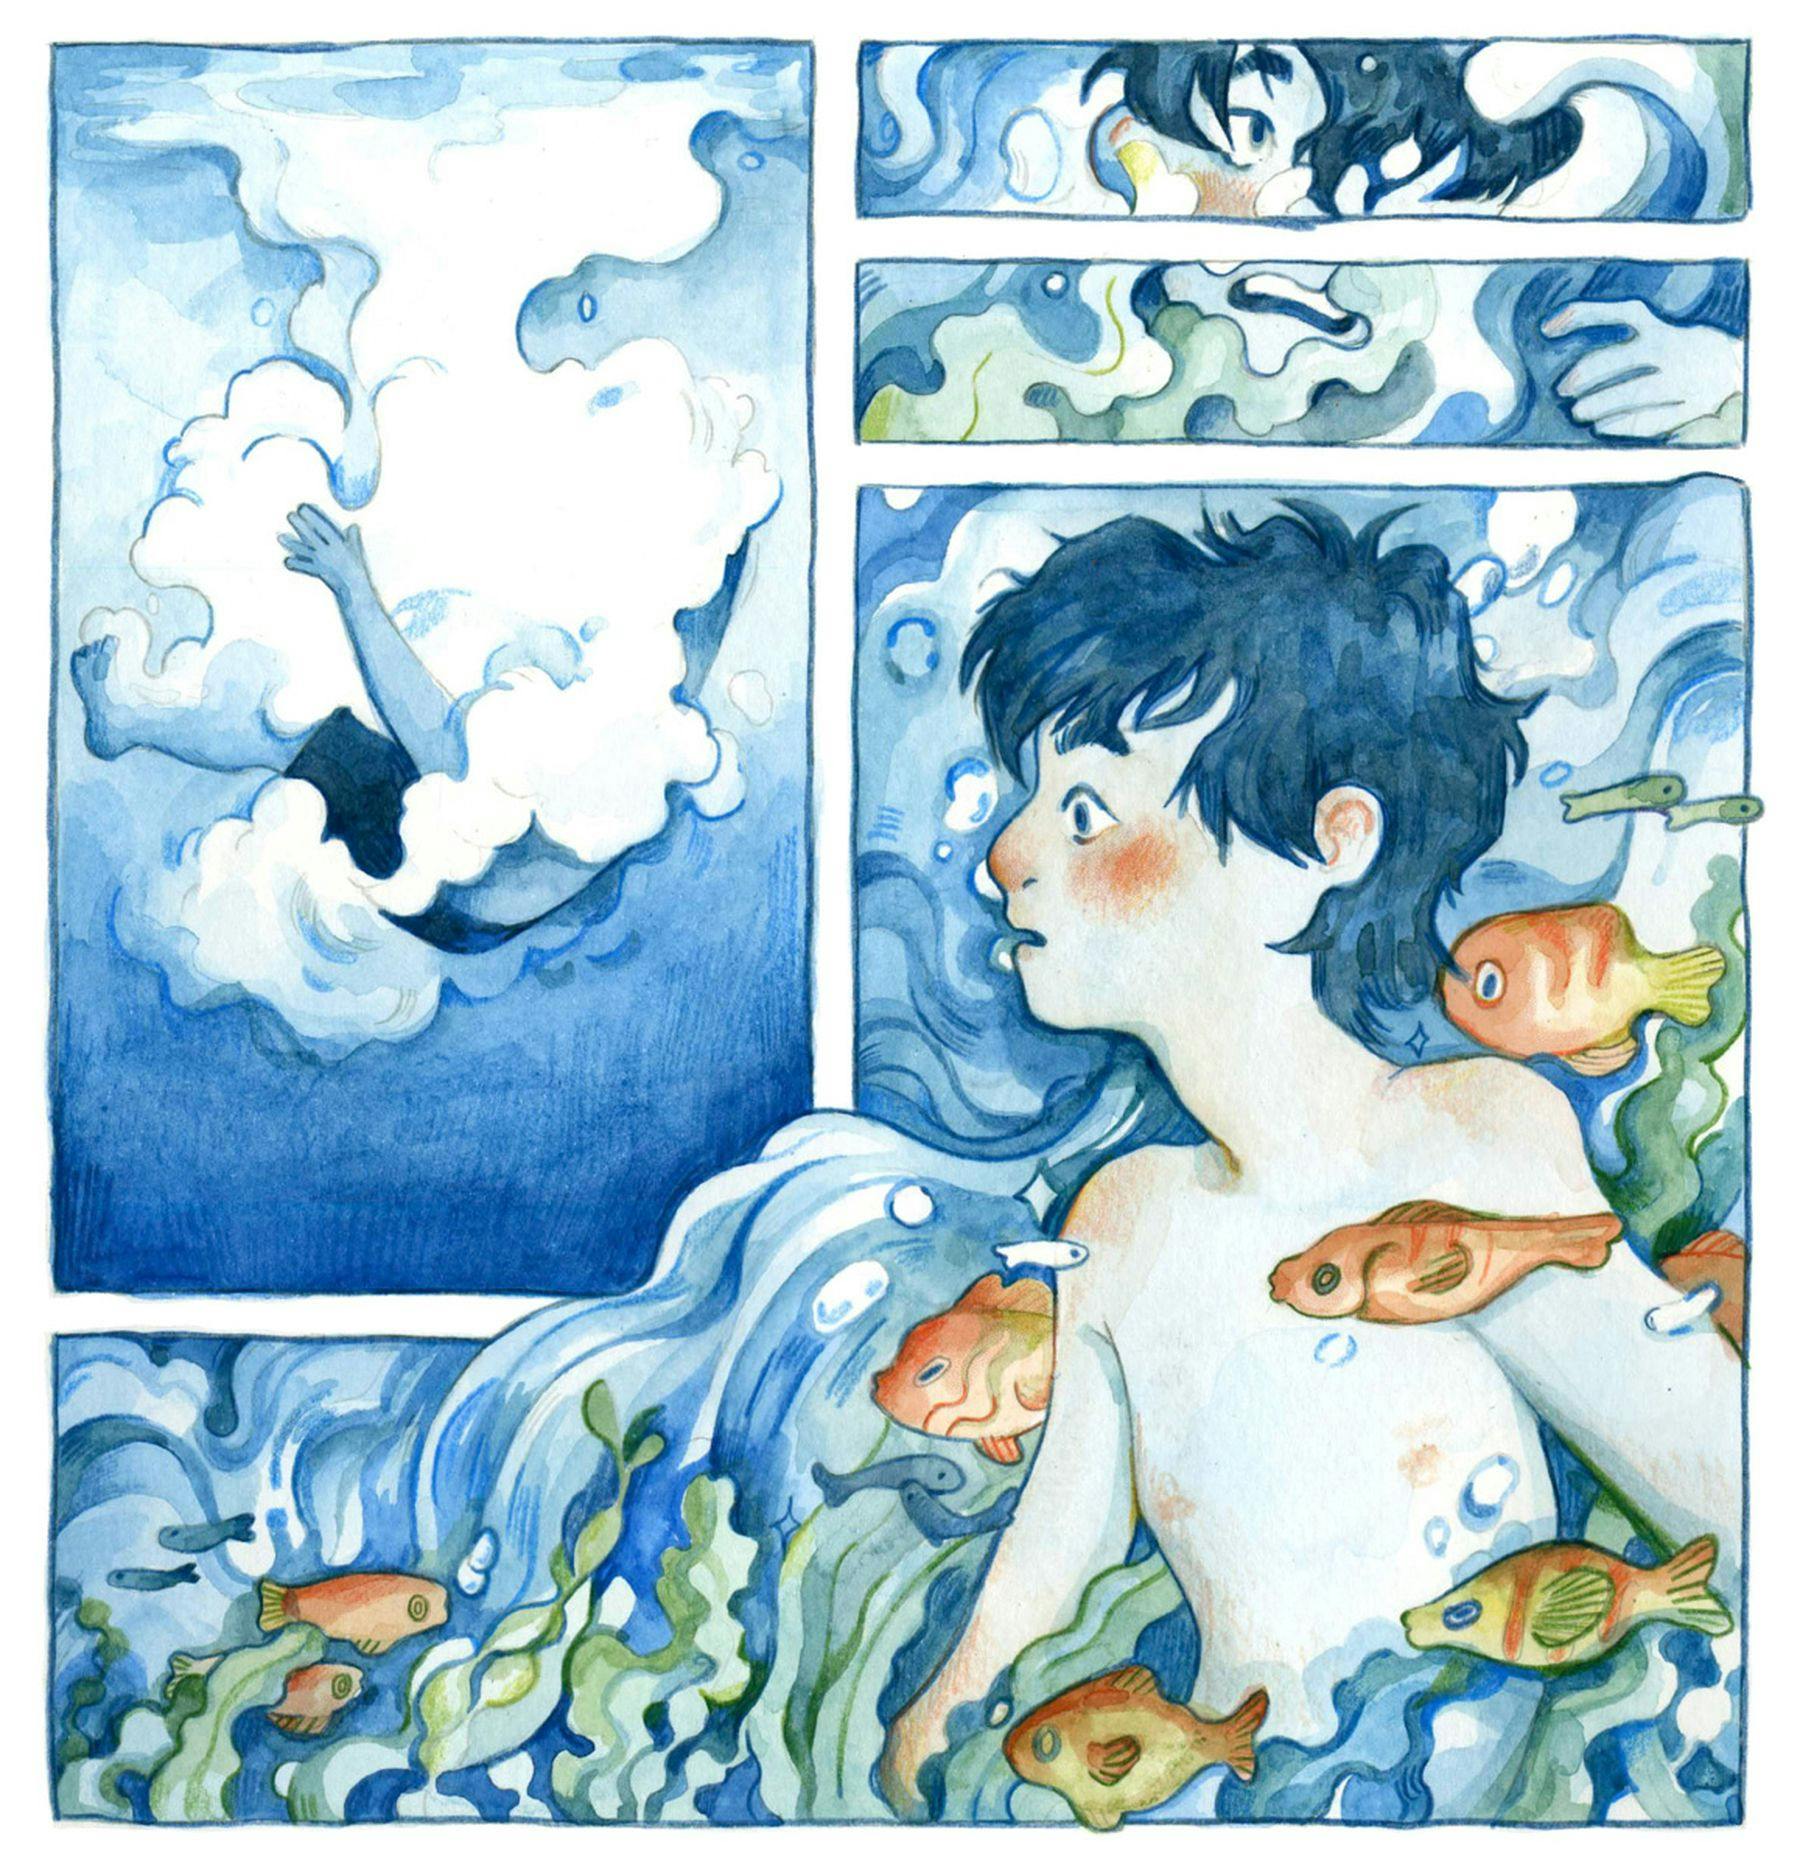 A colourful illustration of different images, set out in a comic book style. The largest image is of a person immersed in the sea surrounded by goldfish and seaweed. The image in the left corner shows an arm and leg reaching out and the image in the right corner shows a face with a pained expression immersed in the water.